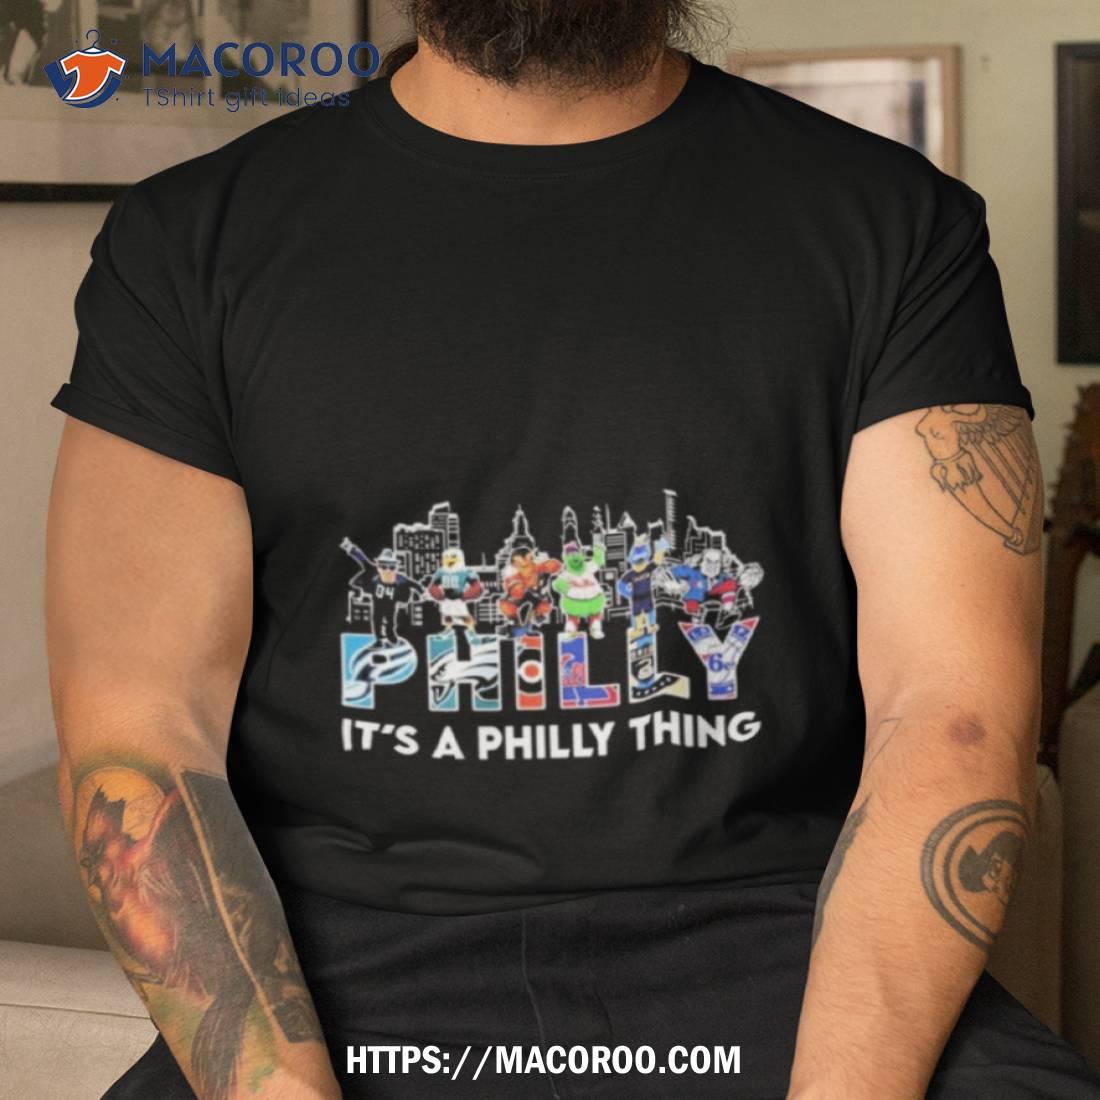 it's a philly thing eagles phillies sixers flyers - Its A Philly Thing -  Long Sleeve T-Shirt